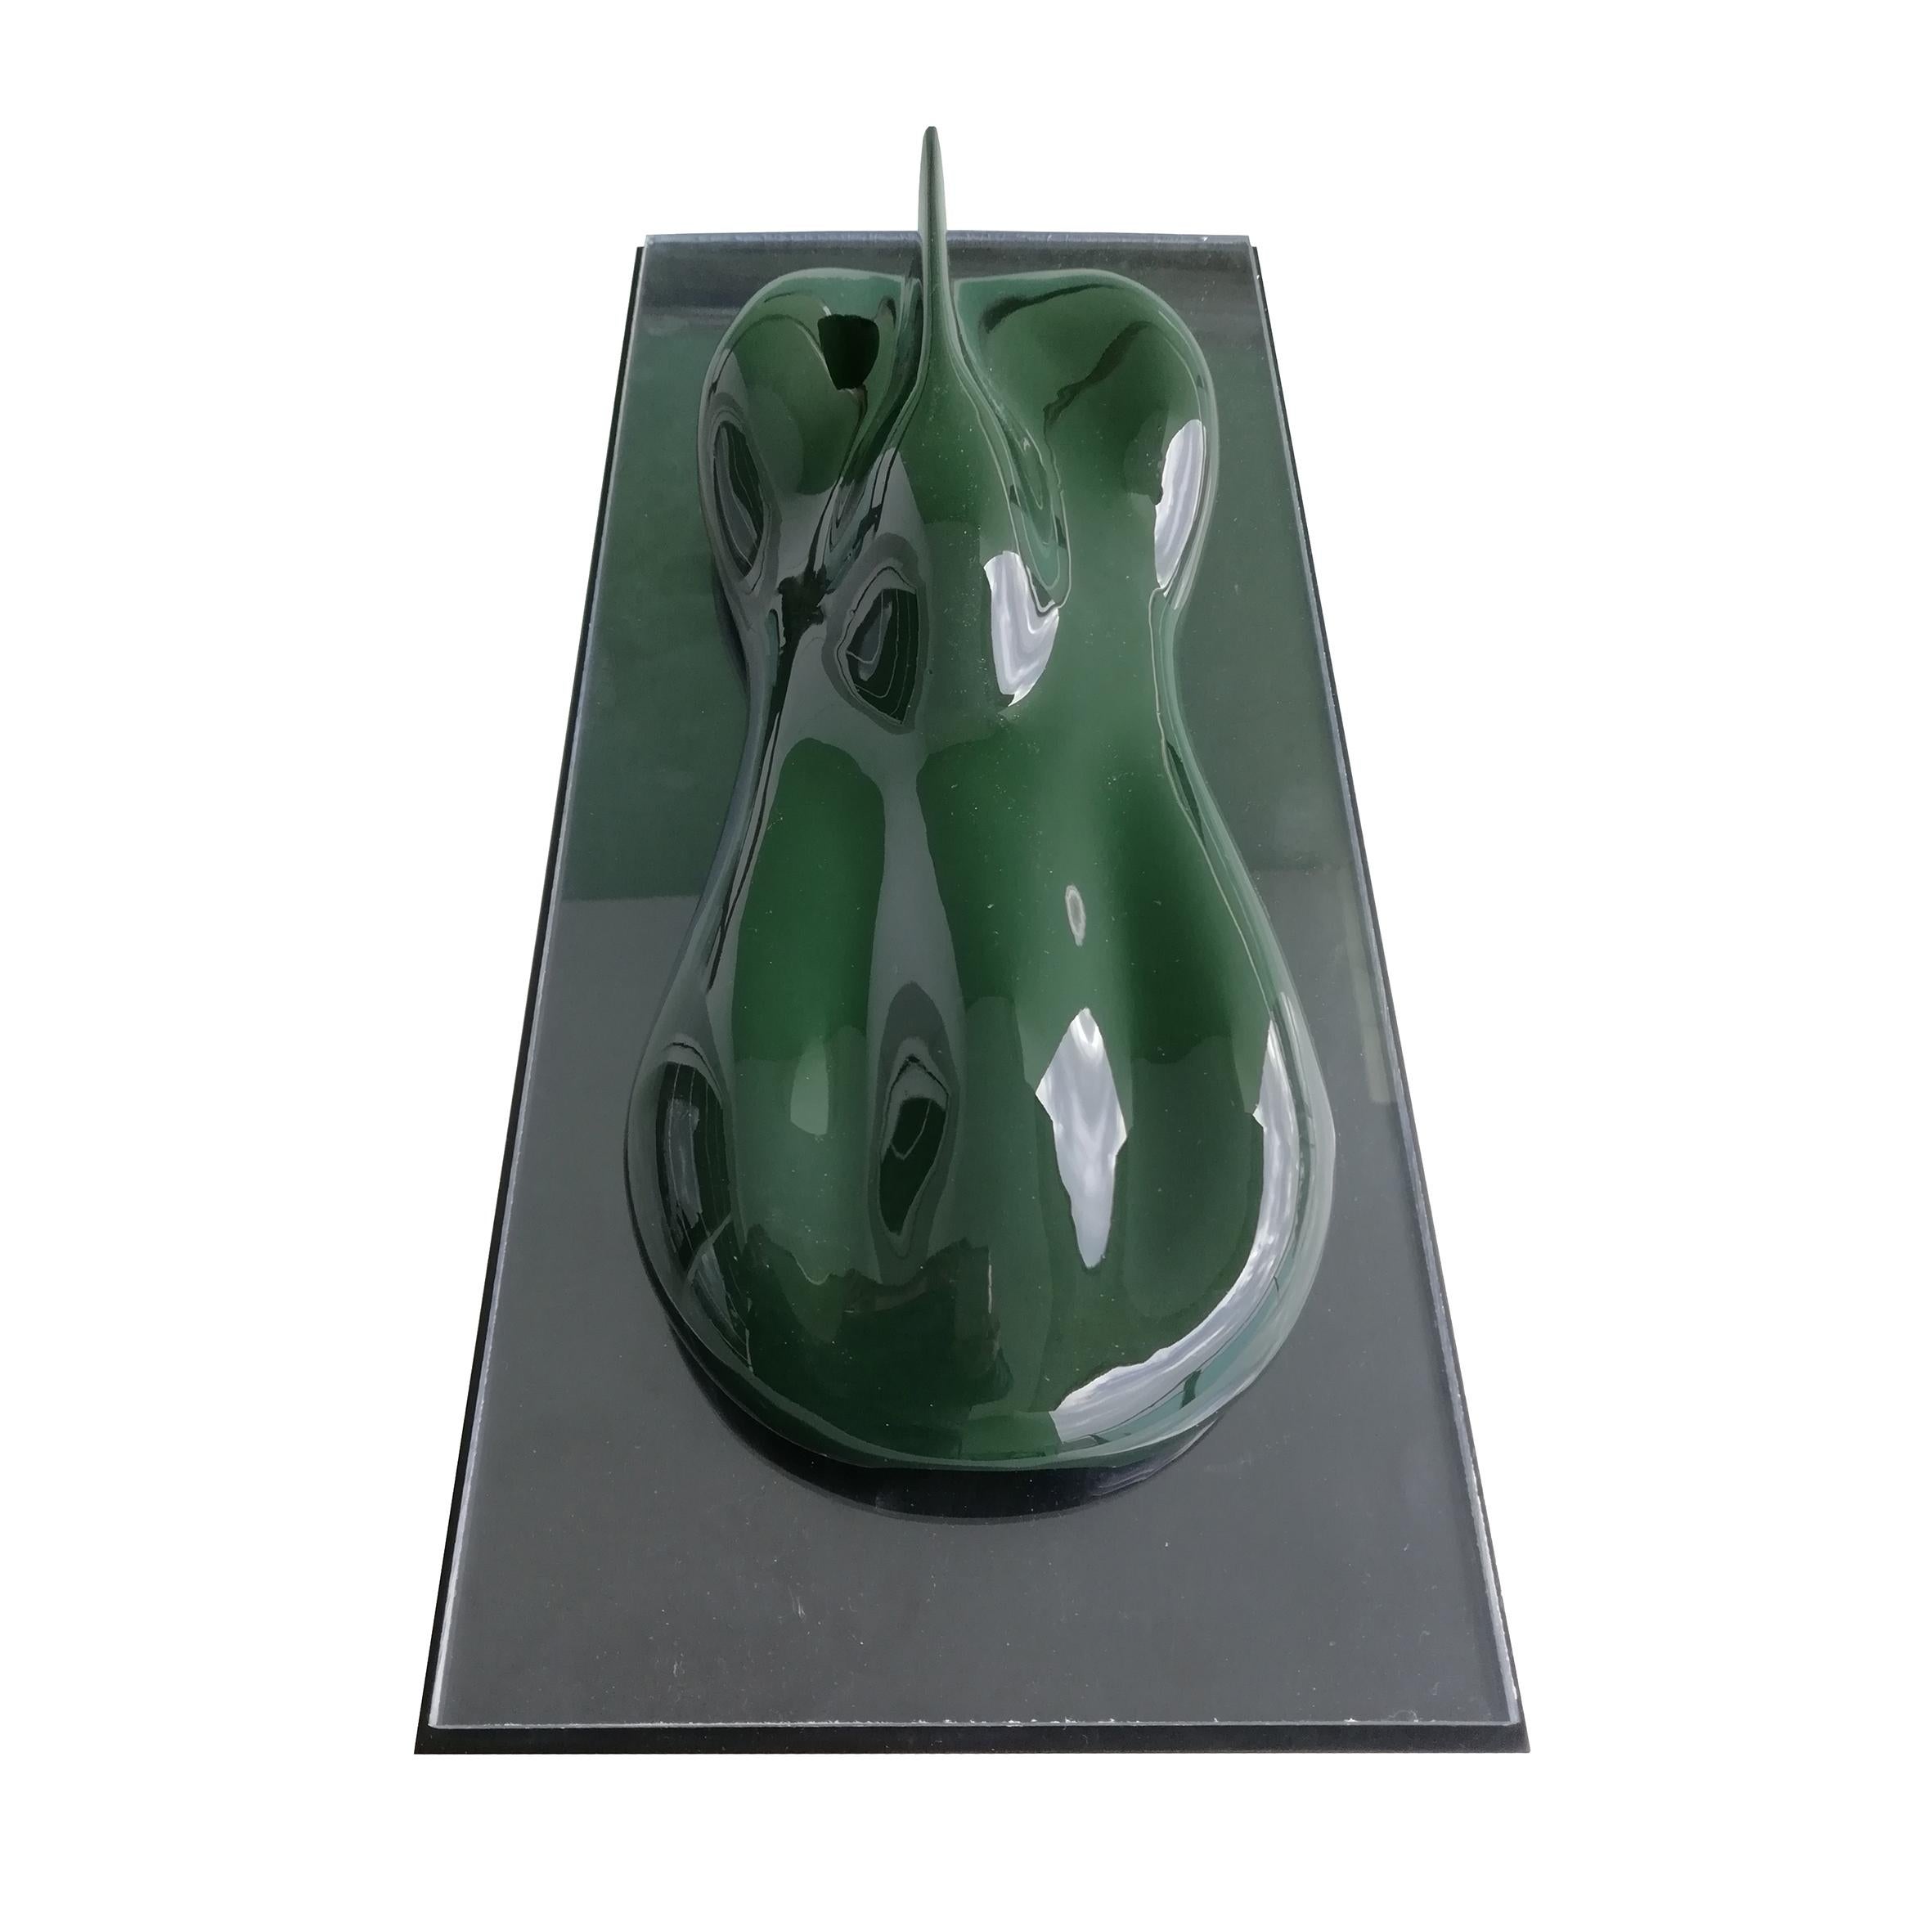 D type

A dark green lacquered and varnished marble composite model of a racing car.
On a lacquered rectangular wood base.

Belzoni finds inspiration in the legendary racing cars of the 1950s and the 1960s.
His elegant sculptures epitomize the